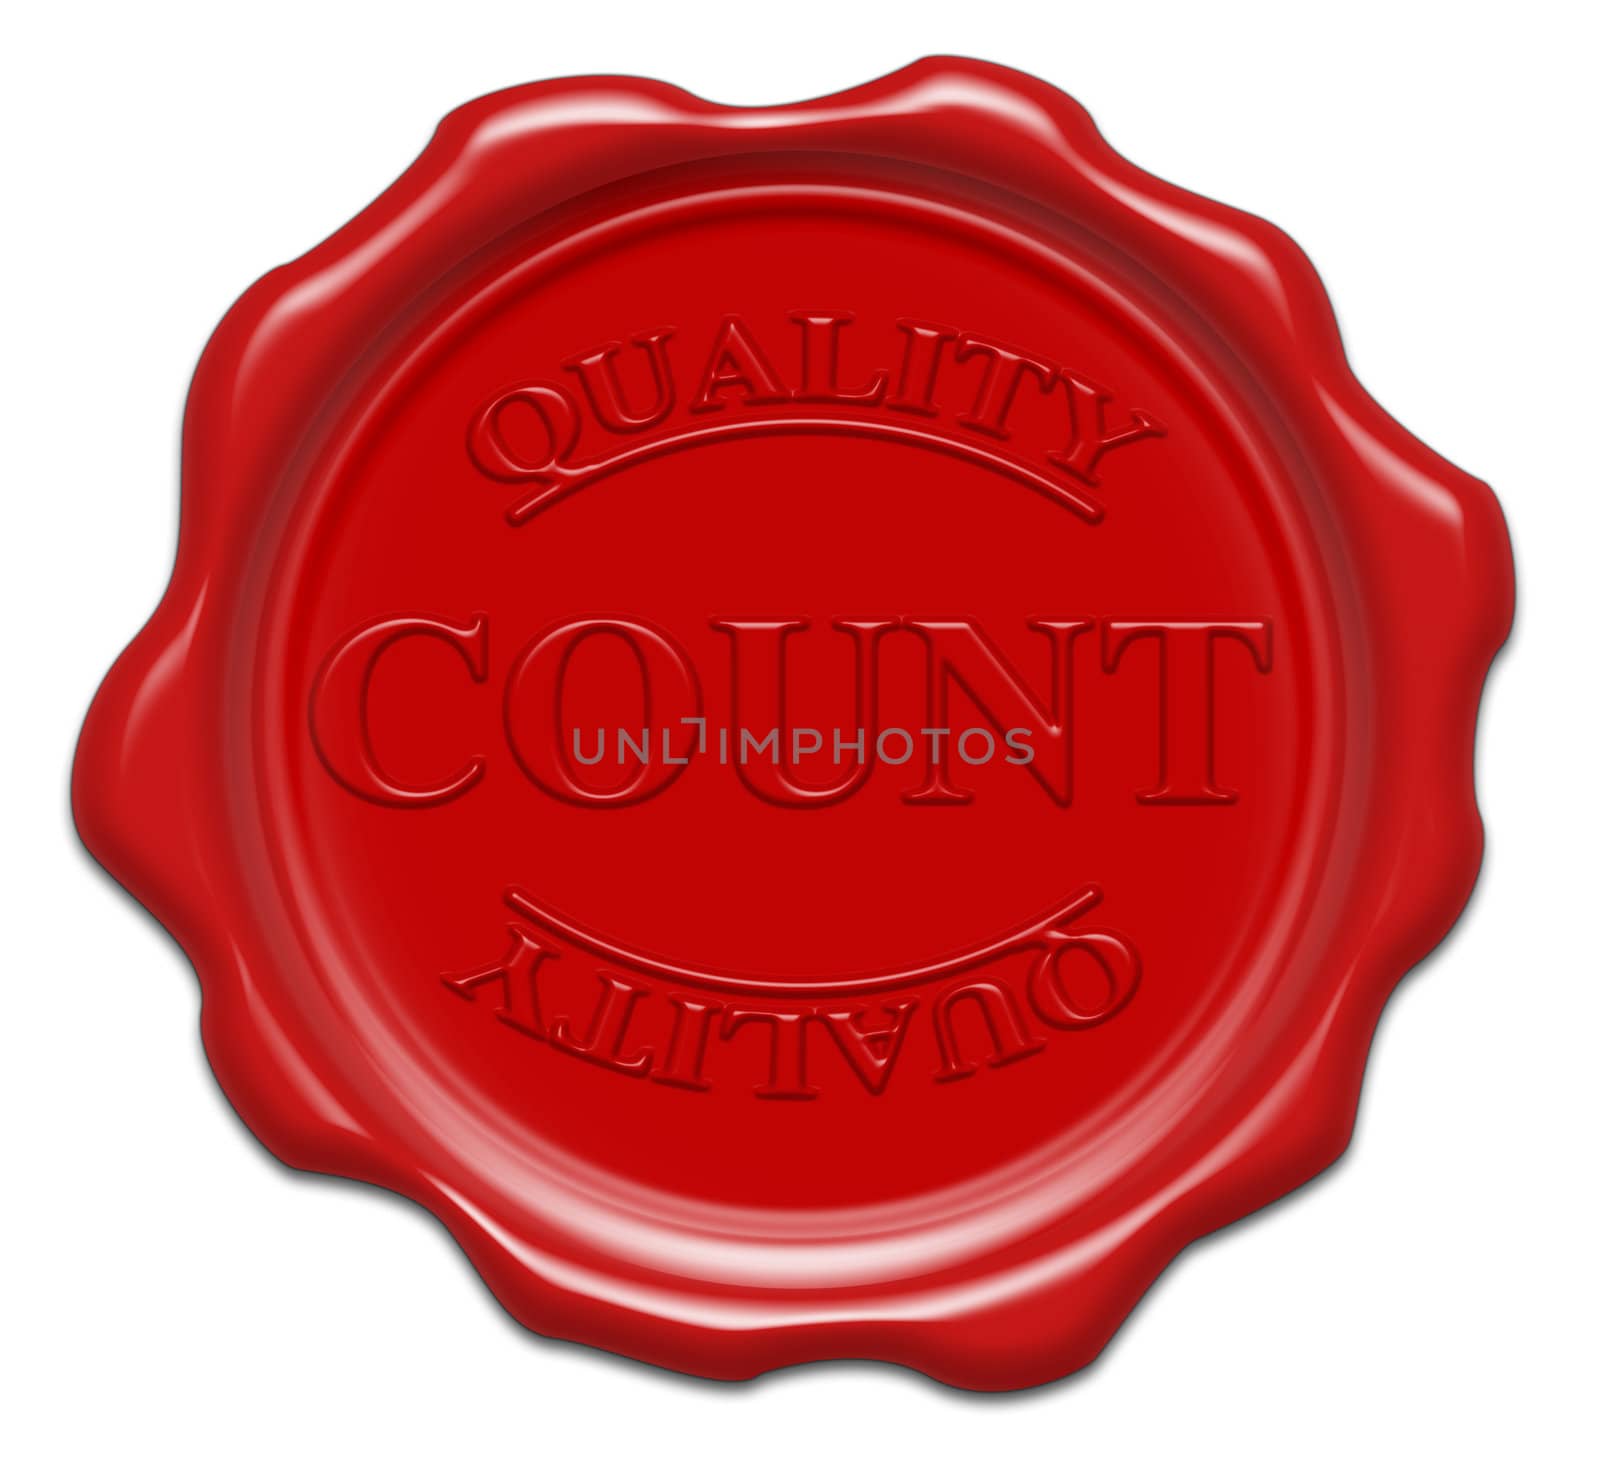 quality count - illustration red wax seal isolated on white back by mozzyb